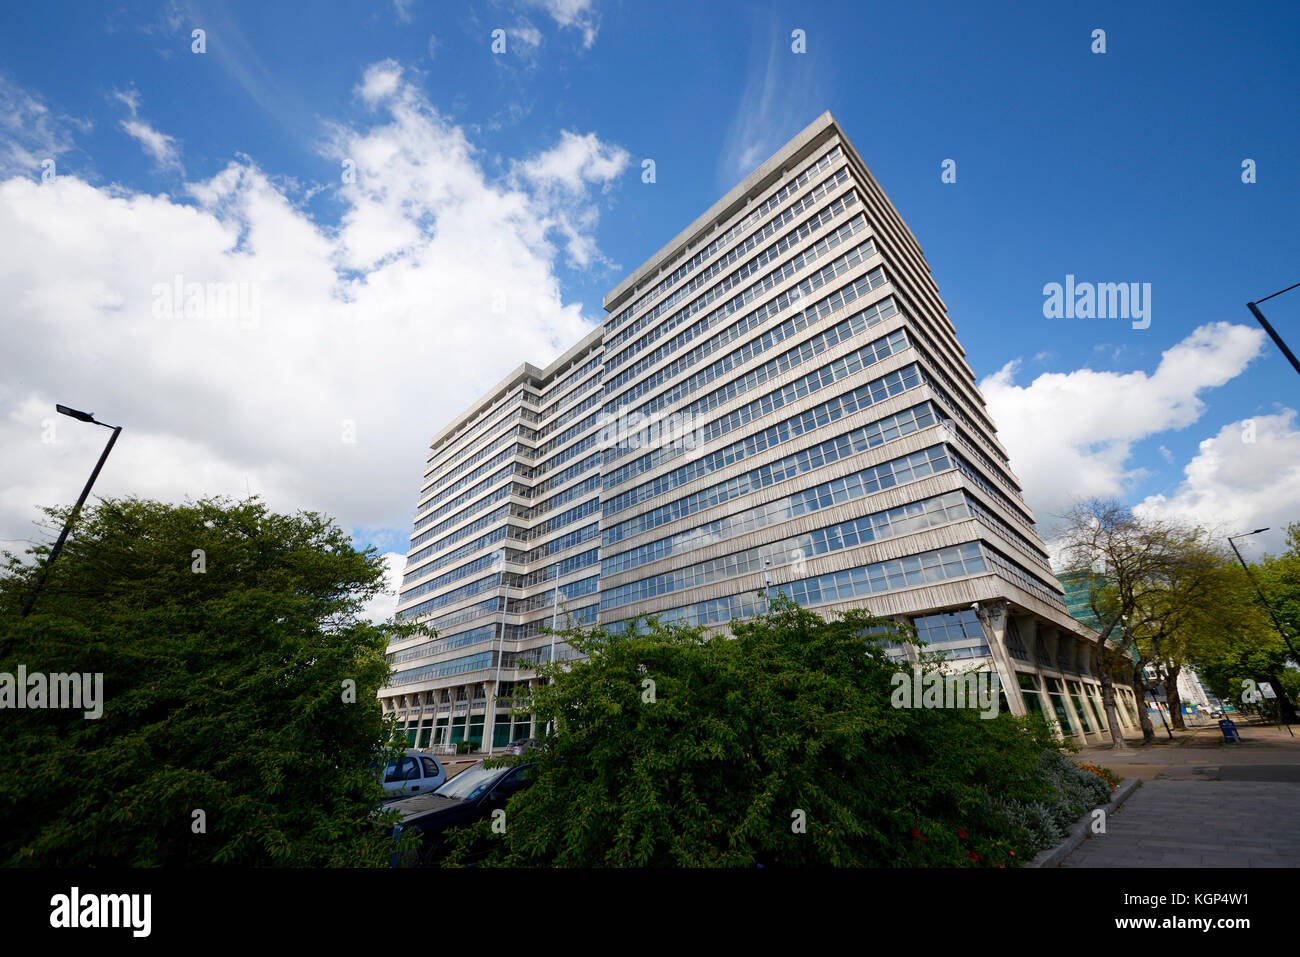 HMRC Alexander House, Queensway, Southend on Sea, Essex. HM revenue and customs office. Office block. Tax office building. Space for copy Stock Photo